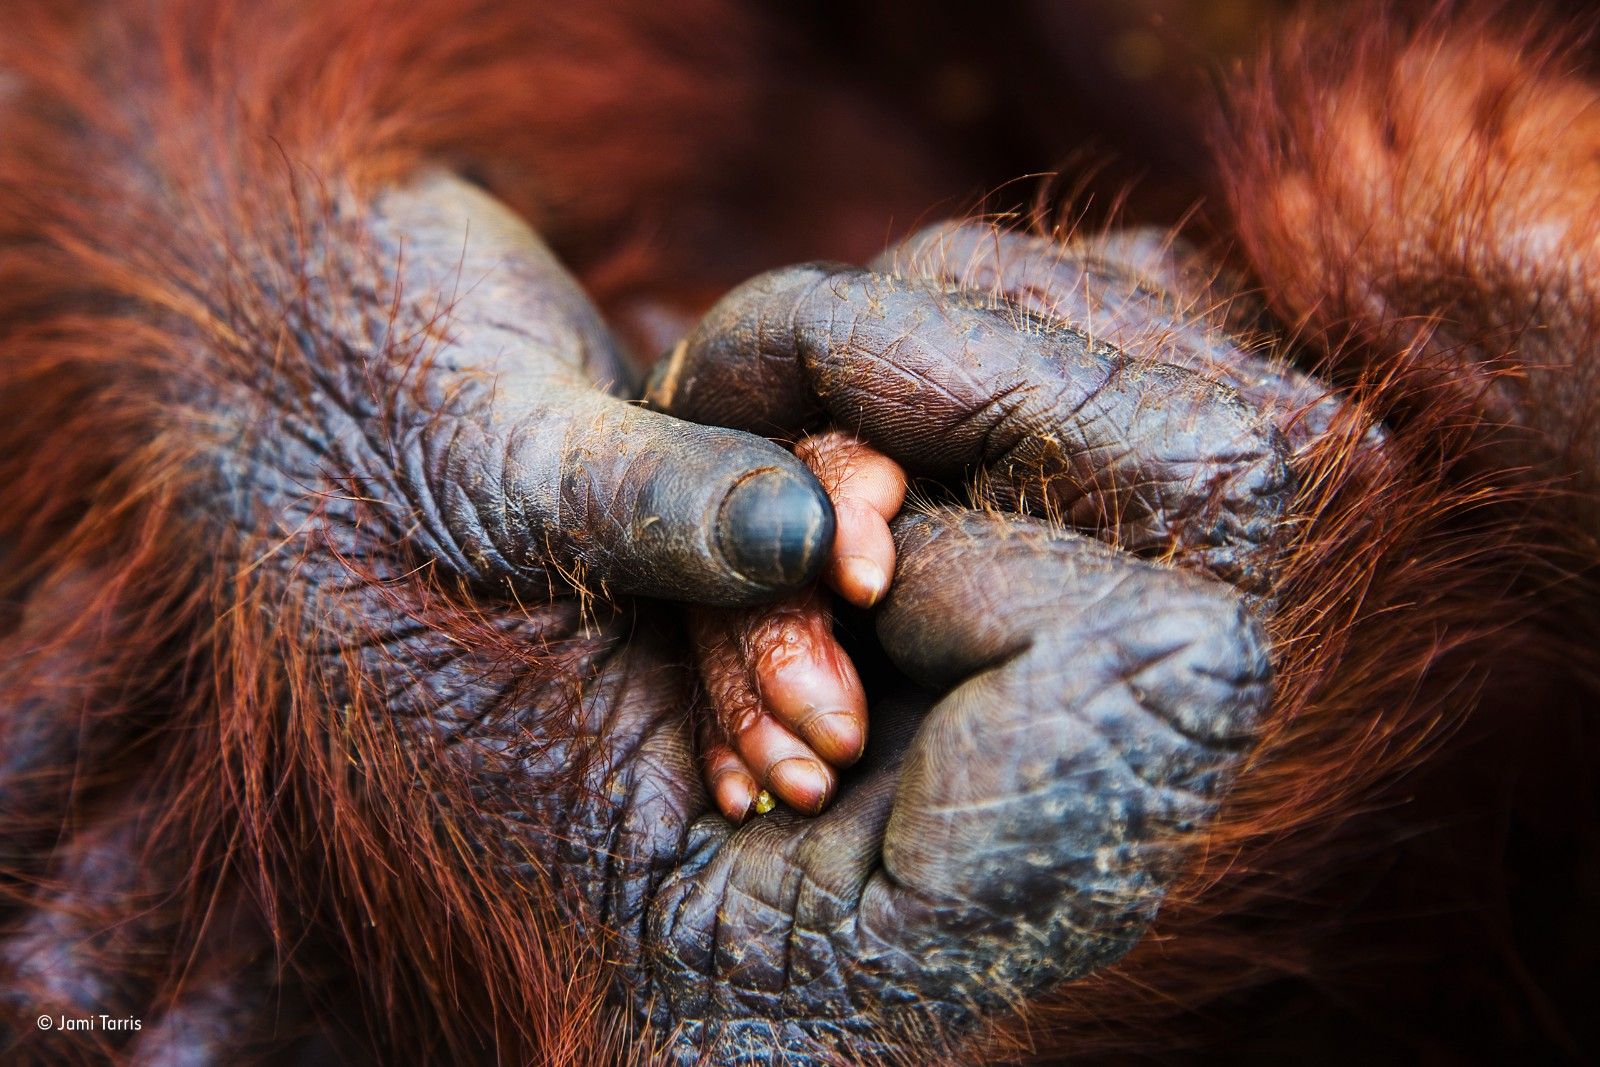 Incredible images from the Wildlife Photographer of the Year competition image 20